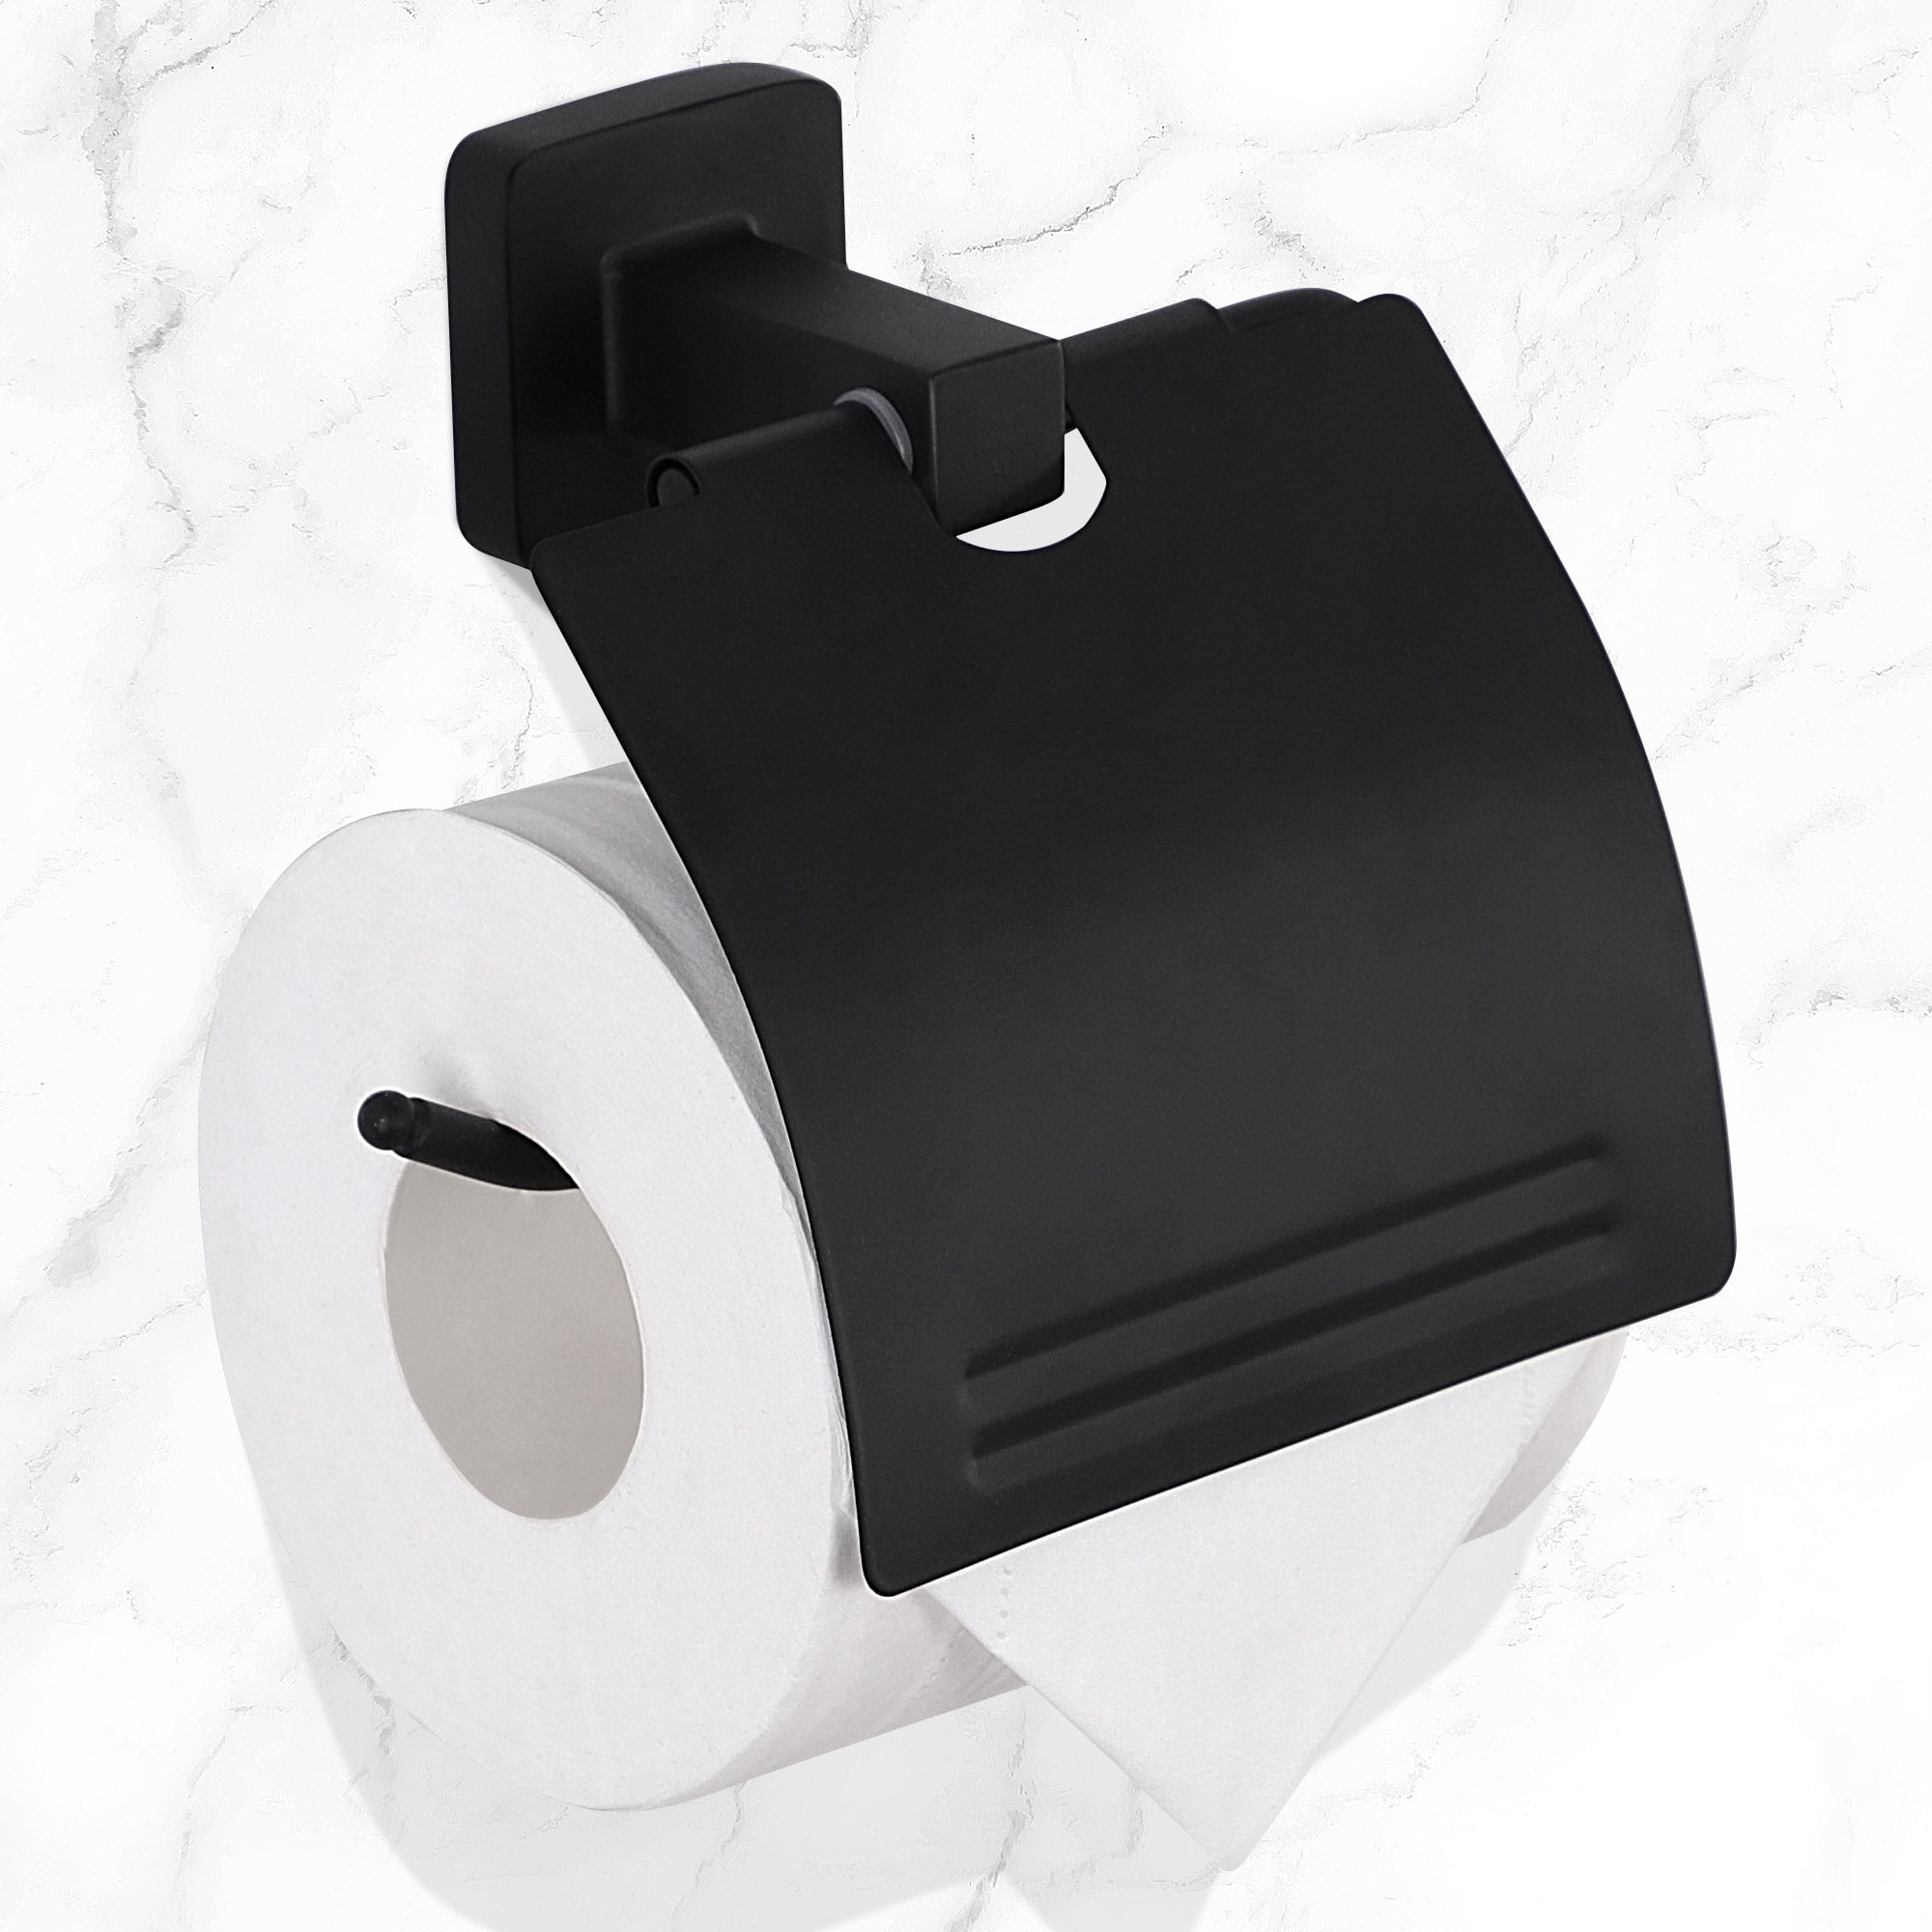 https://ak1.ostkcdn.com/images/products/is/images/direct/96c3f86c7aceabe3829c6d0693b9ad83b78e7447/Toilet-Paper-Holder-with-Cover-Tissue-Holder-Waterproof-Matte-Black.jpg